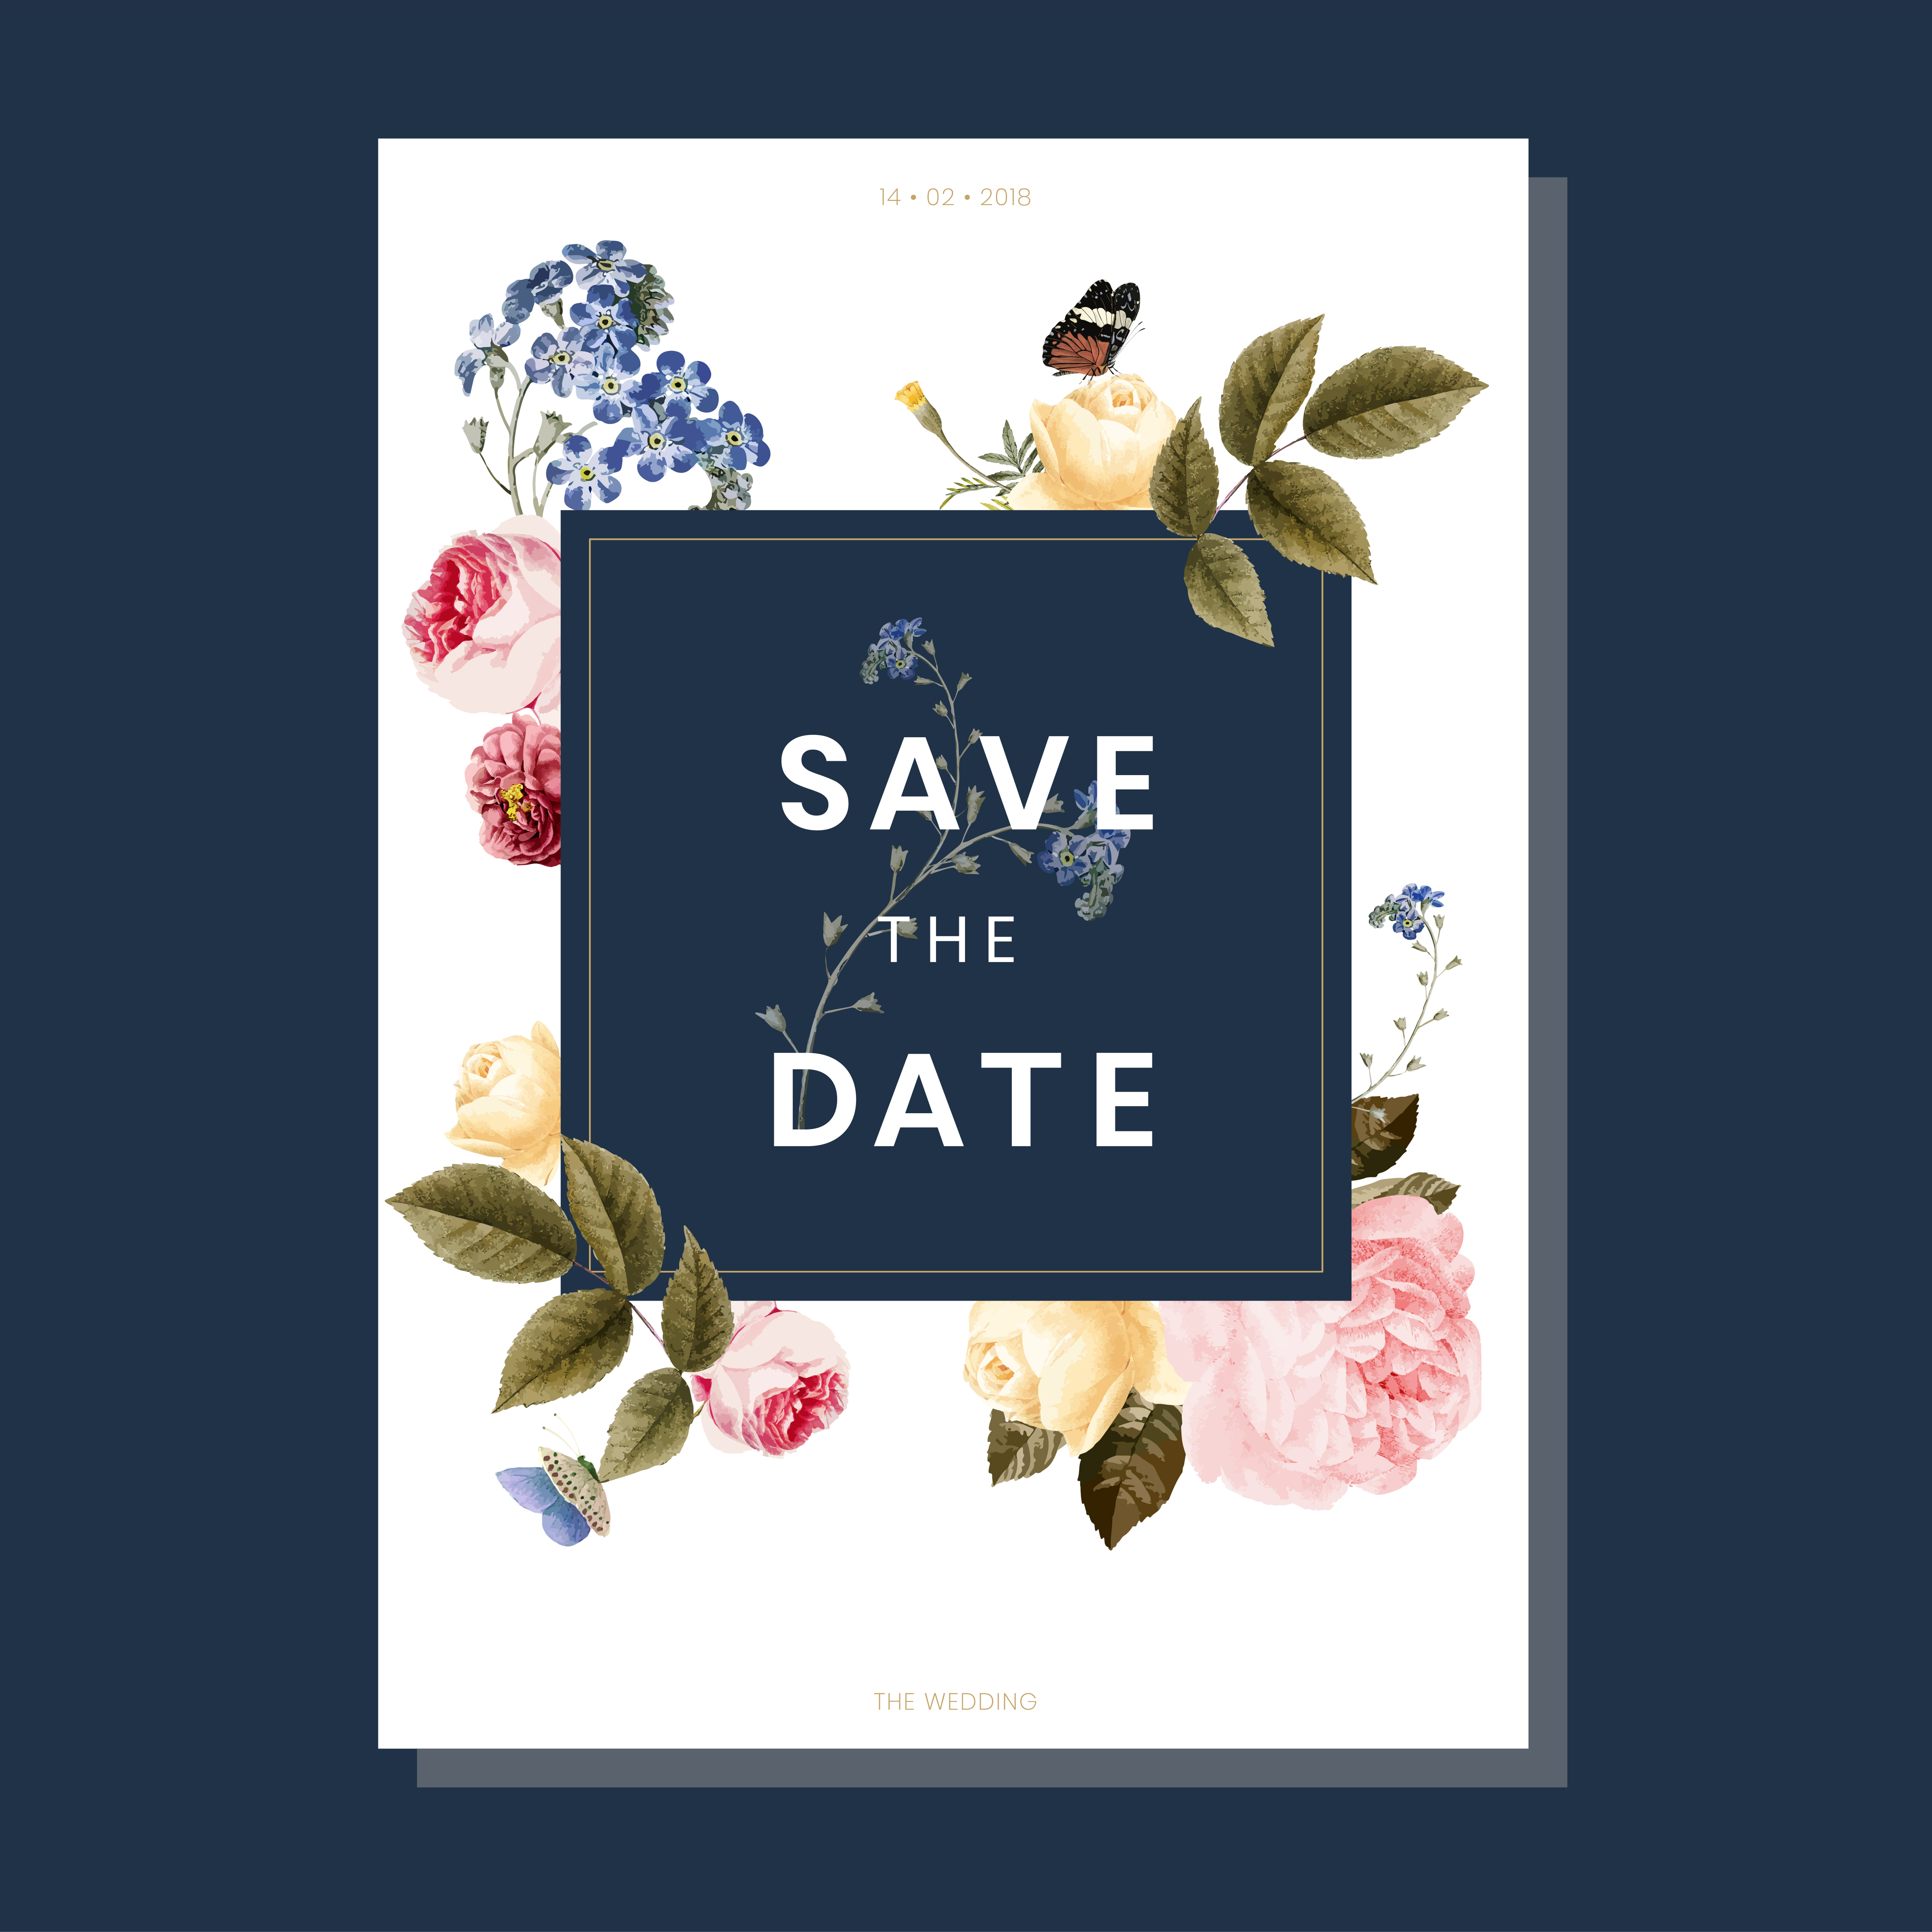 save-the-date-wedding-invitation-download-free-vectors-clipart